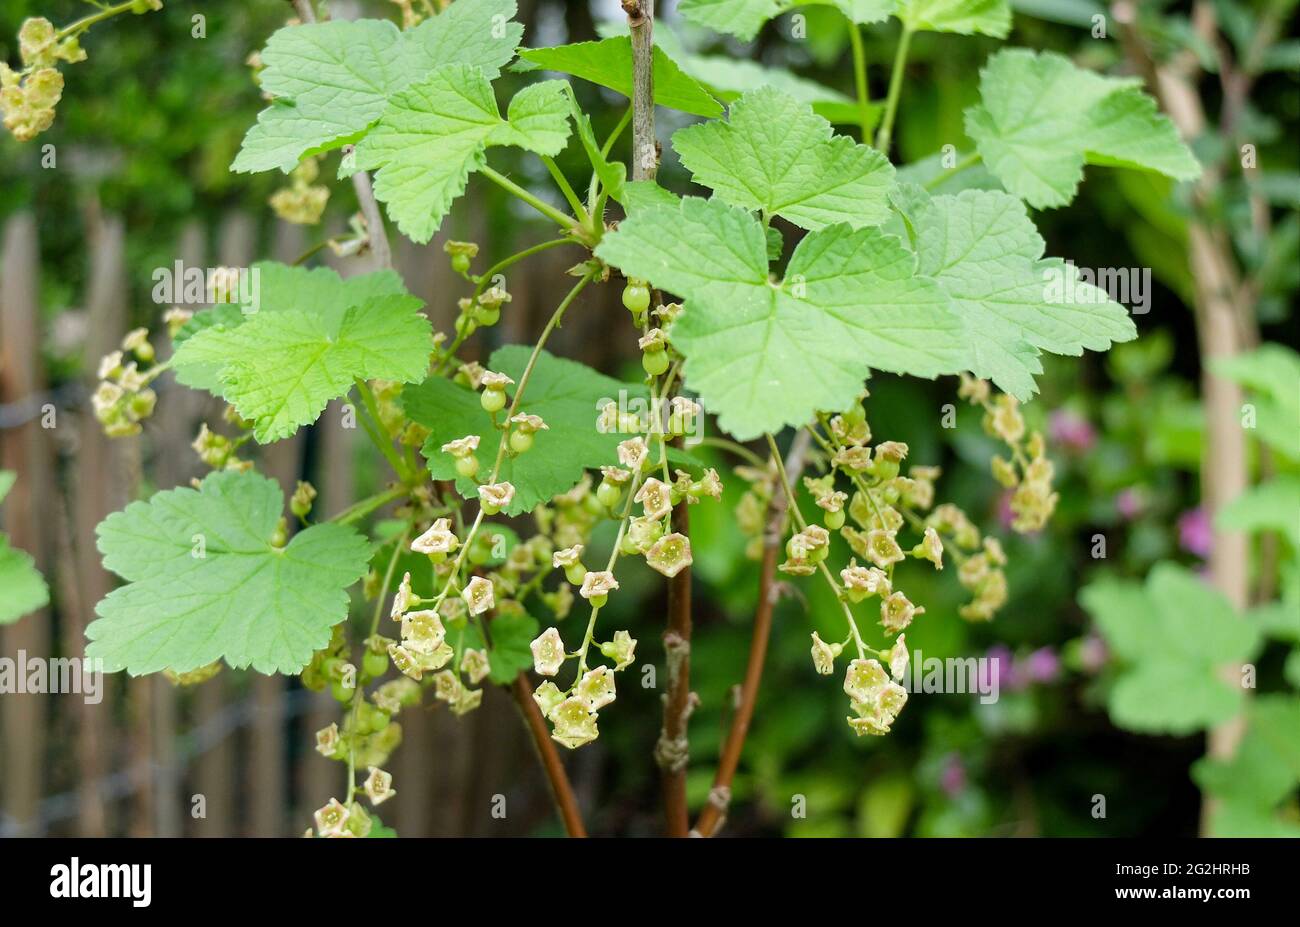 The red currant (Ribes rubrum) in flower Stock Photo